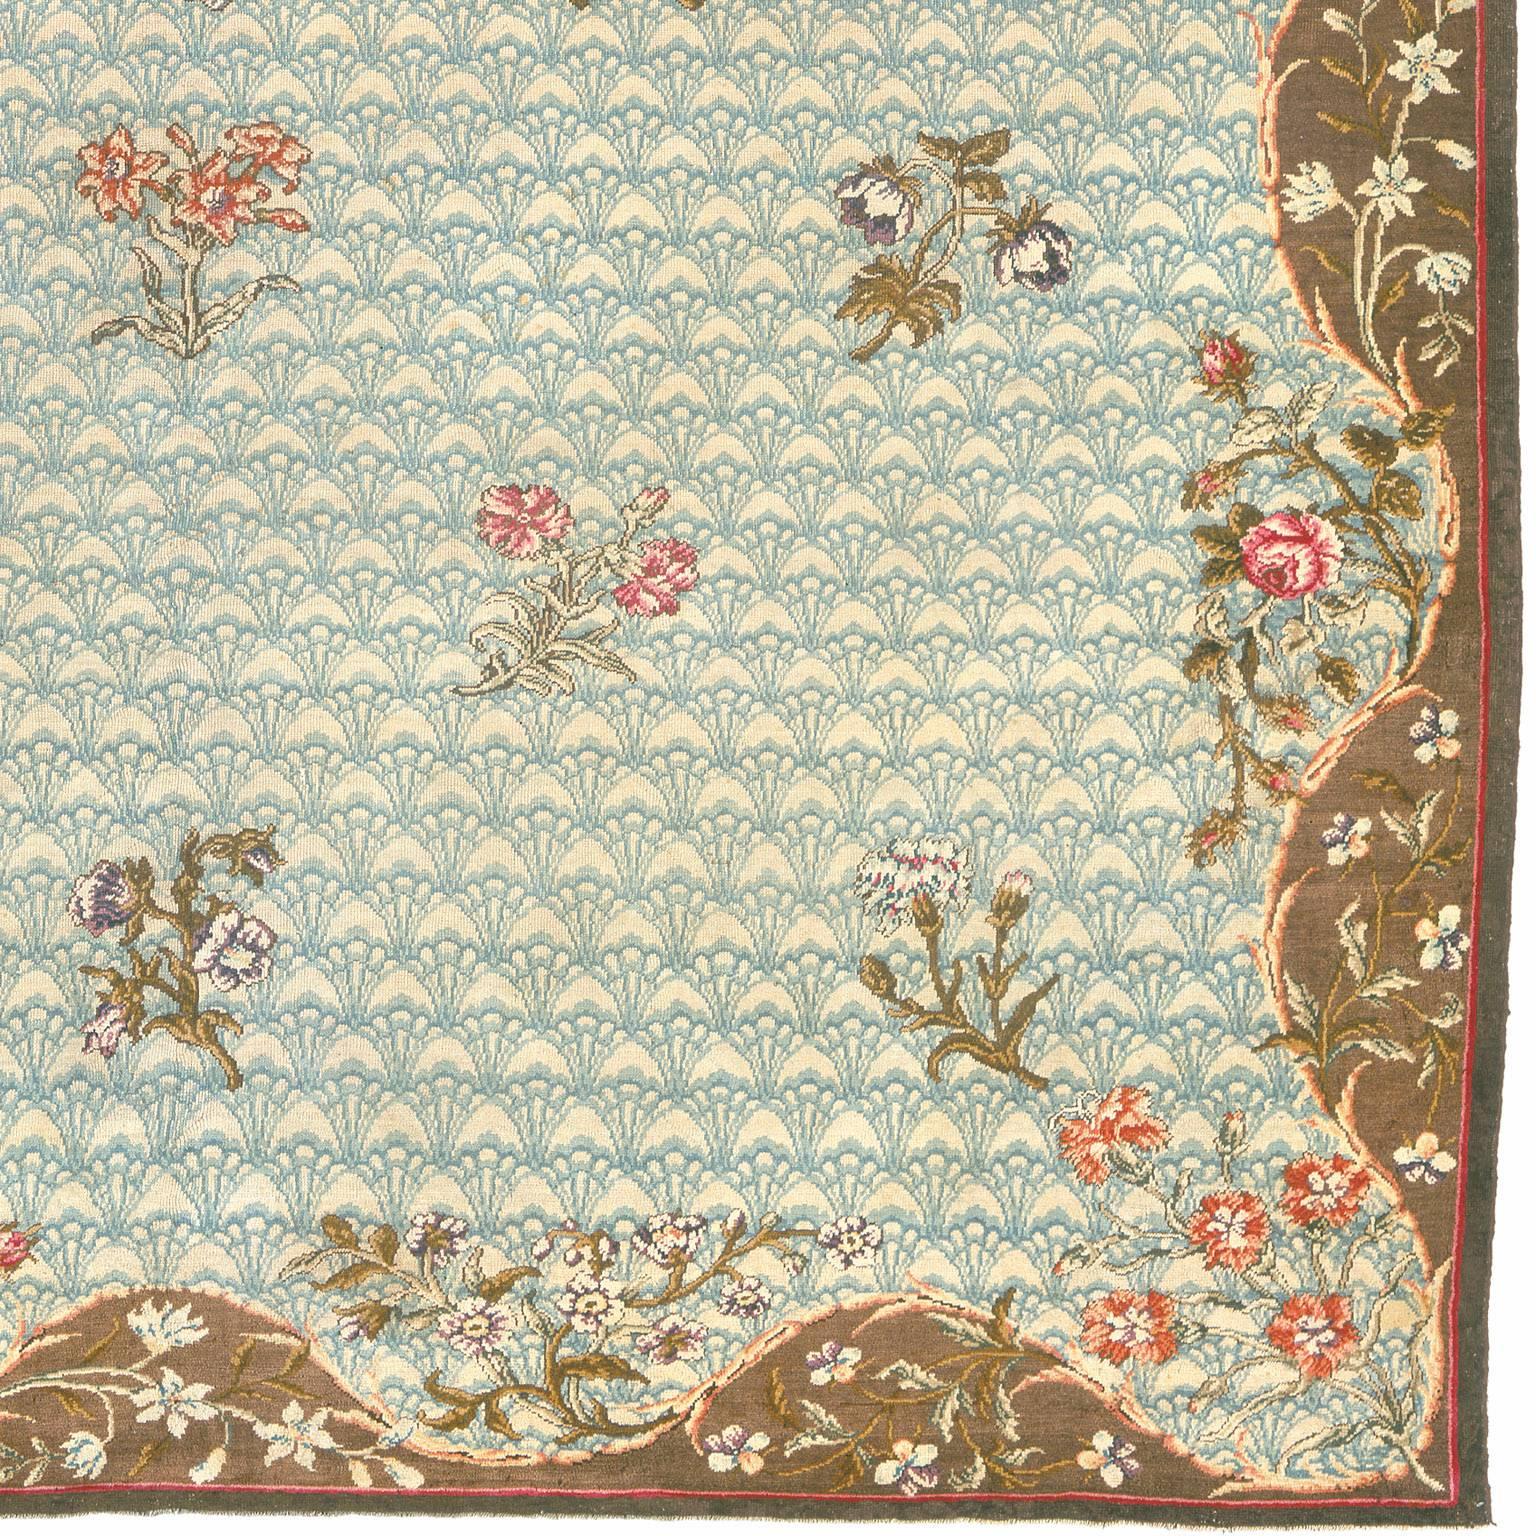 English Axminster rug, 1765
England, circa 1765
The ivory field with a tracery design of blue stylized leaves decorated with numerous floral sprays centered by a naturalistic flowering spray framed by mud brown spandrels enclosed by a narrow